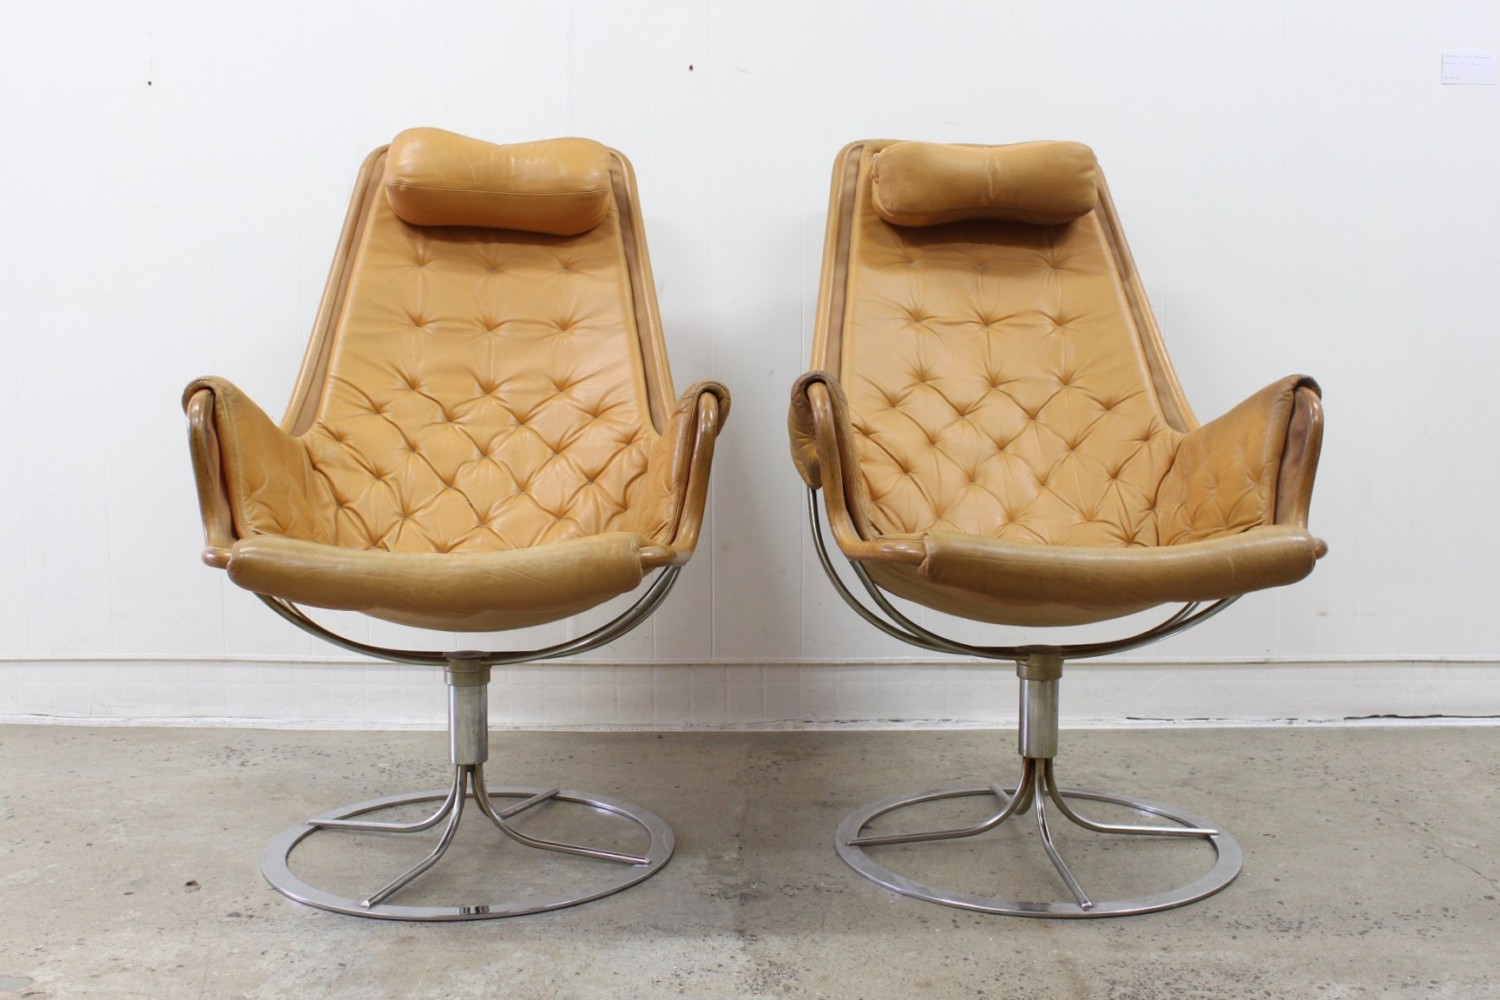 ‘Jetson chairs’ by Bruno Mathsson